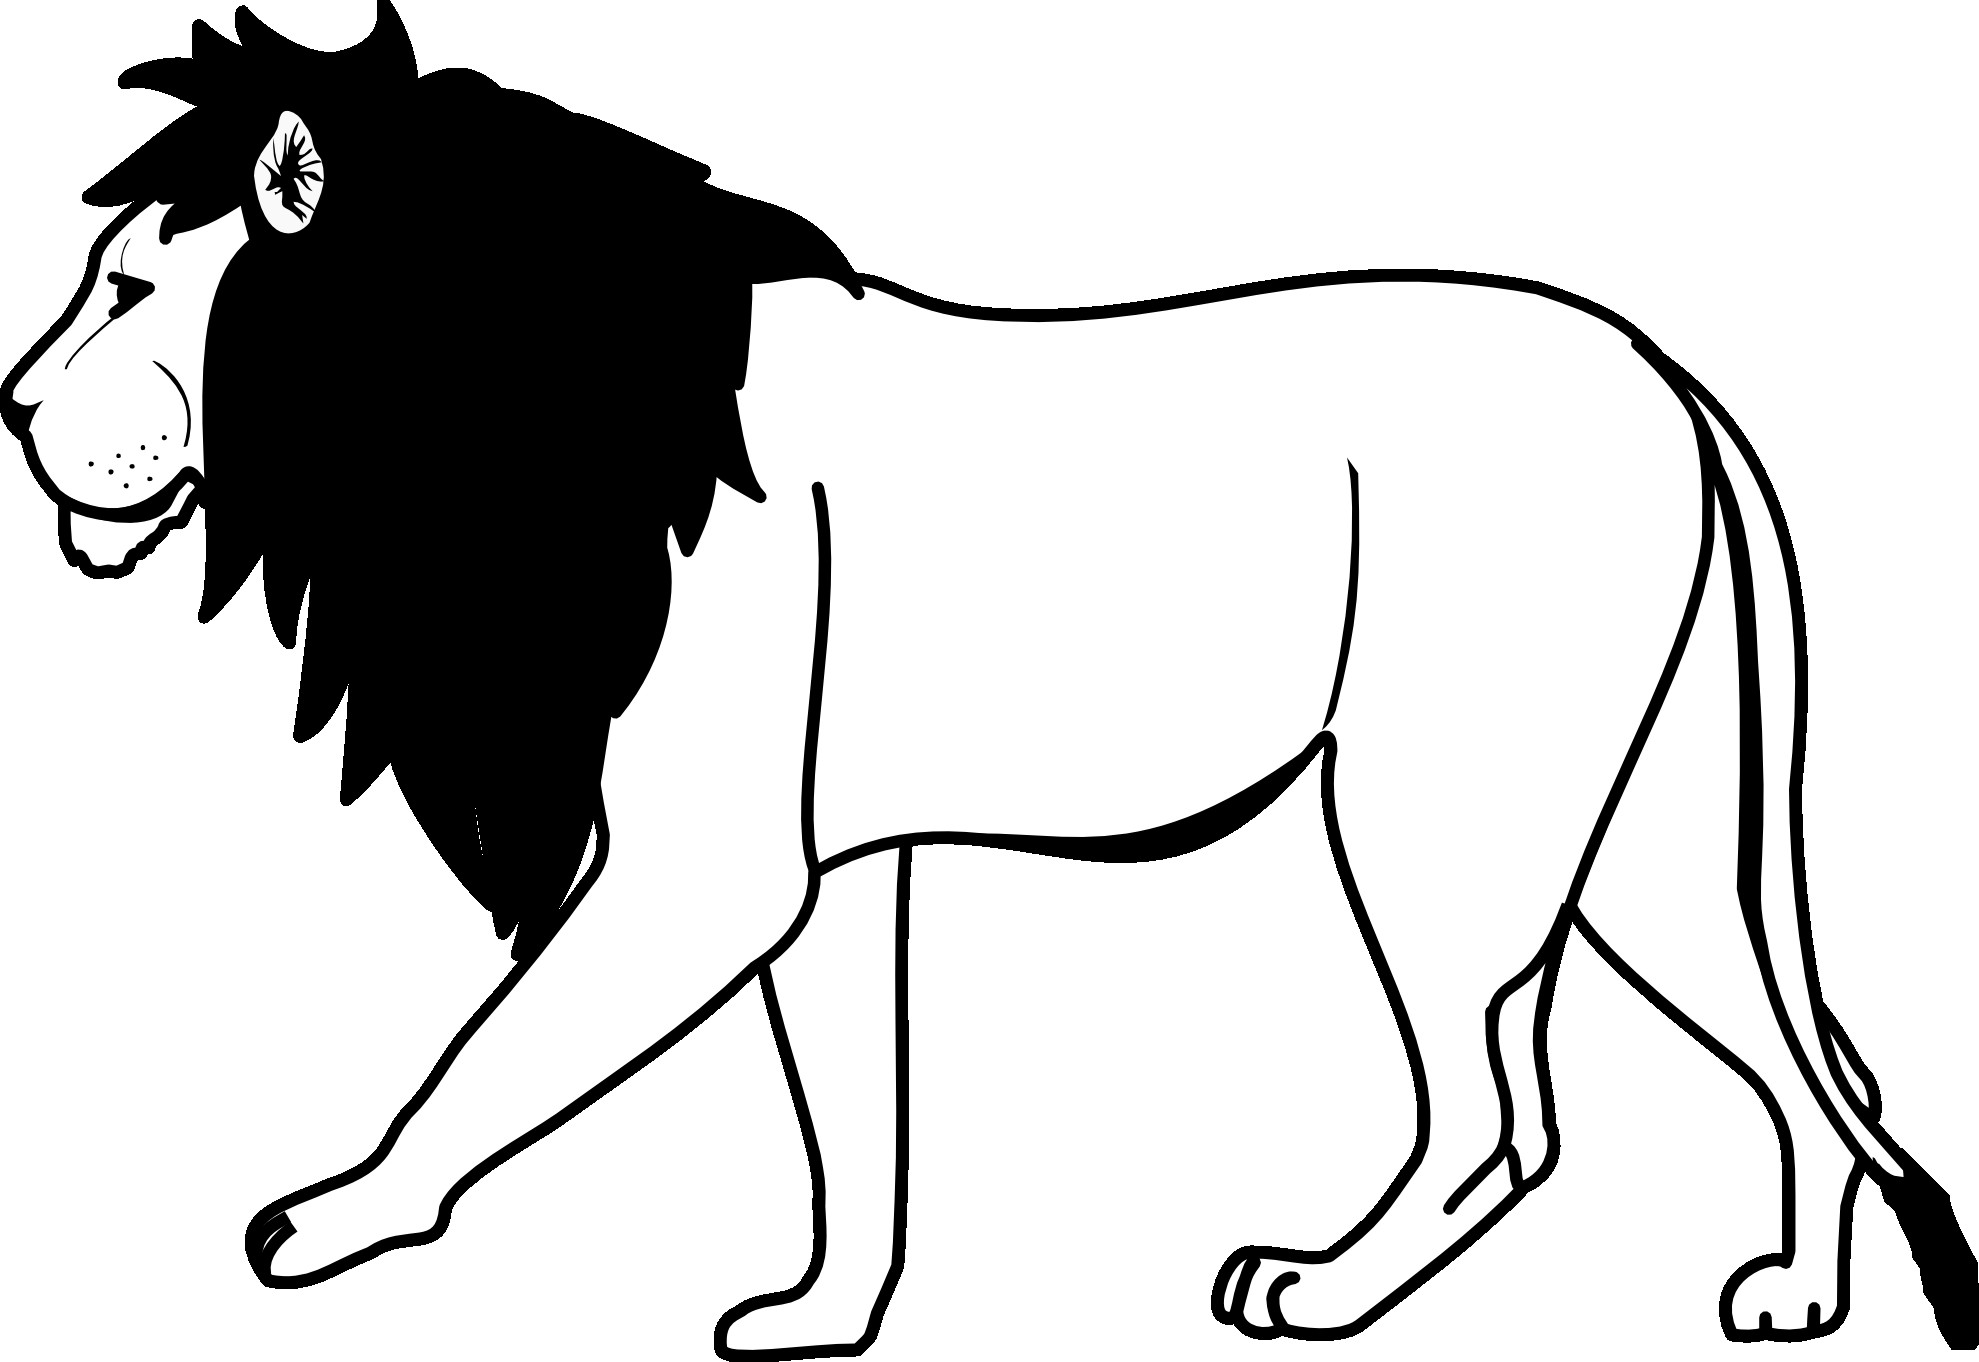 White Lion clipart lion outline Pencil and in color